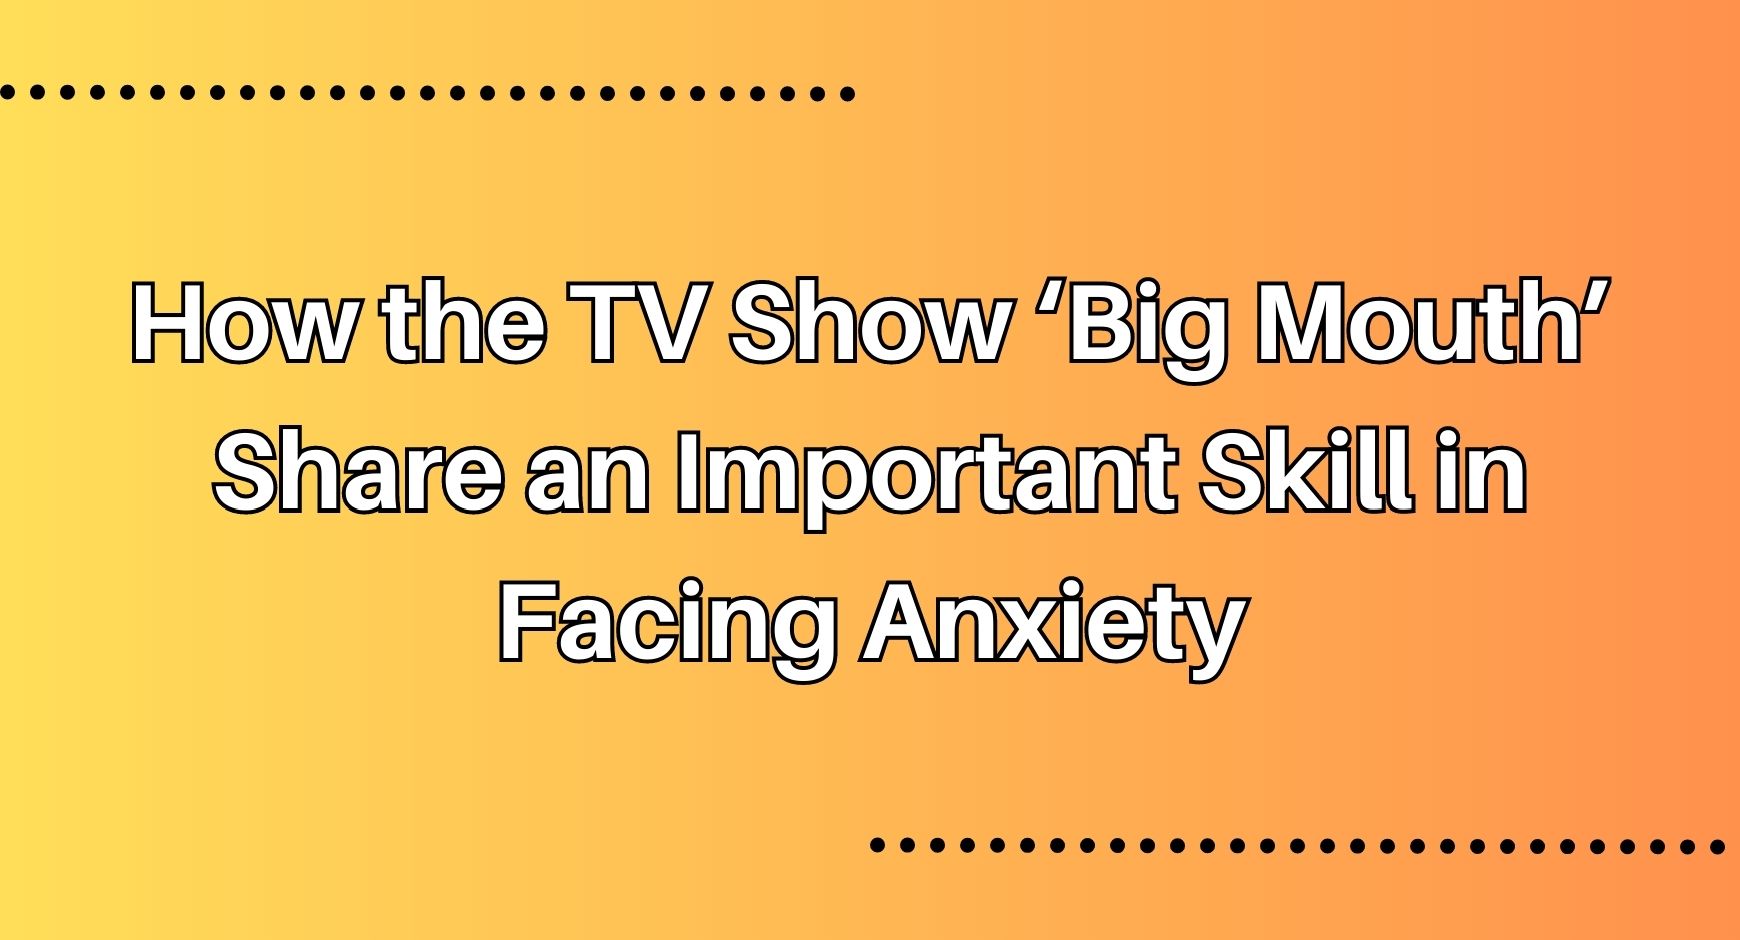 The words "How the TV Show ‘Big Mouth’ Share an Important Skill in Facing Anxiety" over a yellow and orange gradient background.